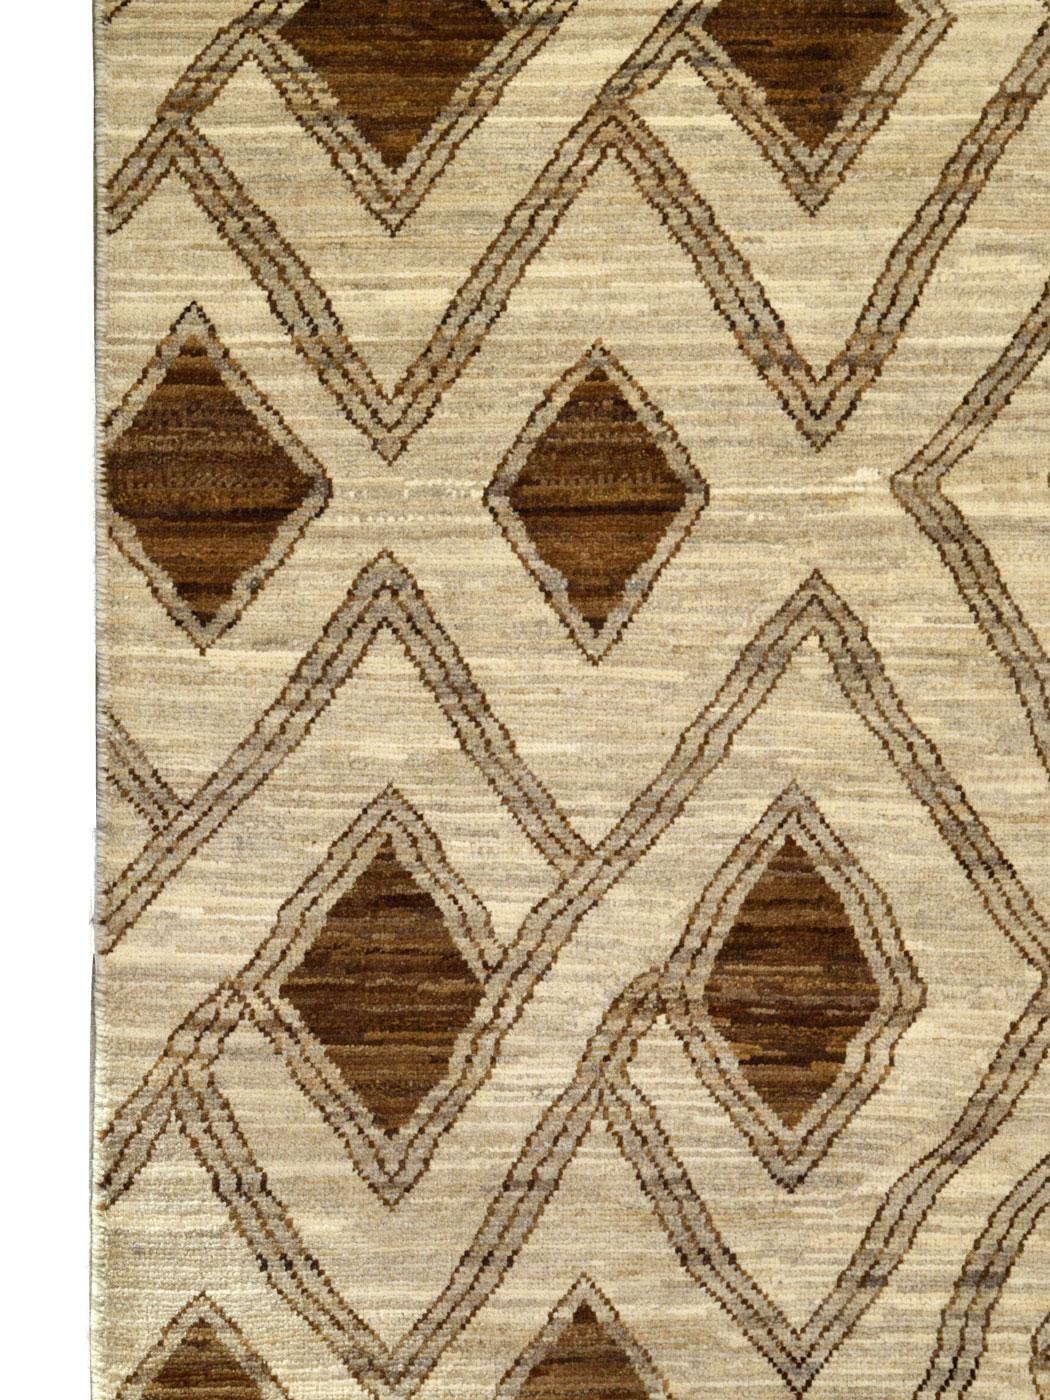 Vegetable Dyed Geometric Neutral Wool Carpet in Brown and Cream, 6' x 9' For Sale